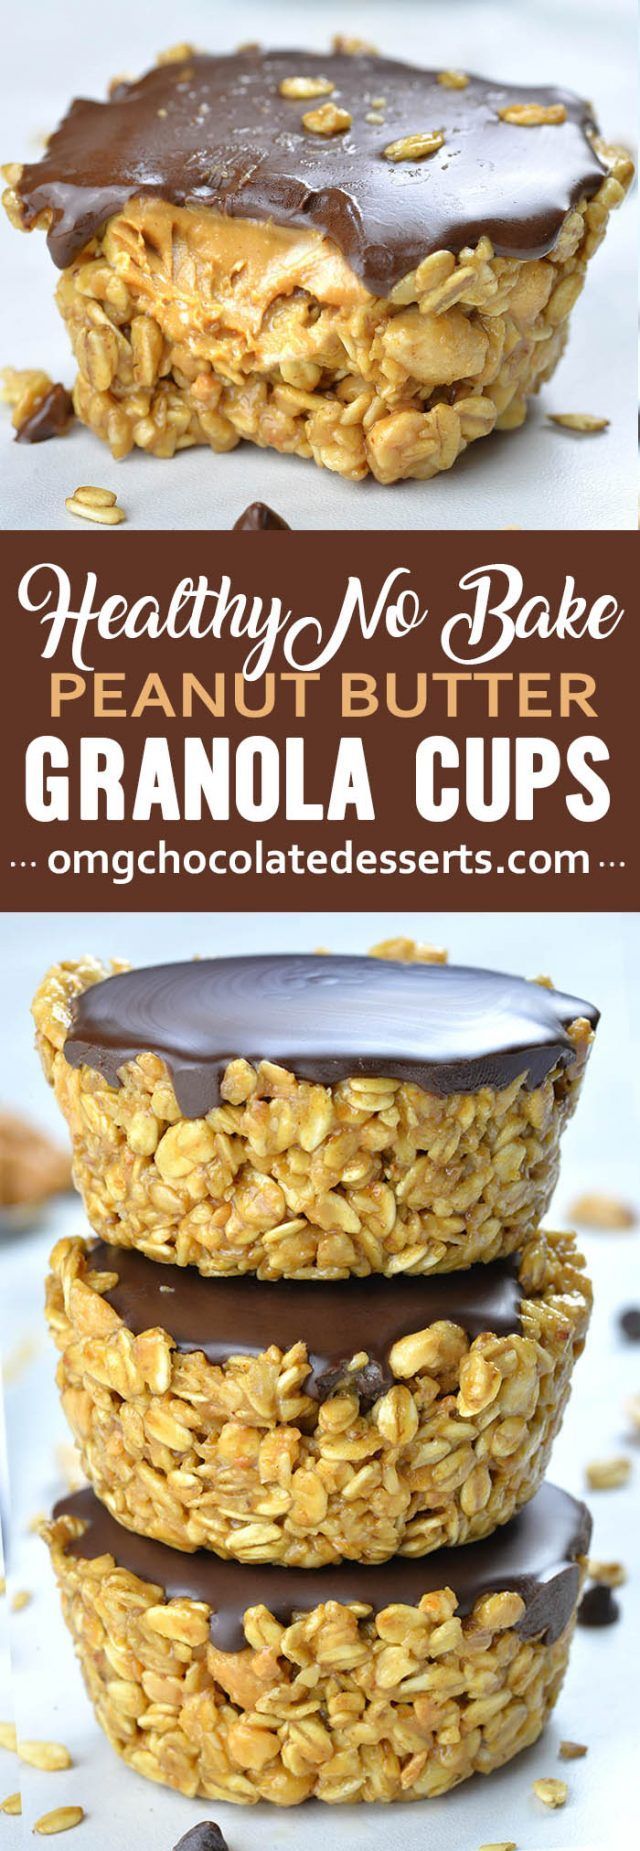 No Bake Peanut Butter Granola Cups -   11 healthy recipes Clean chocolate chips ideas